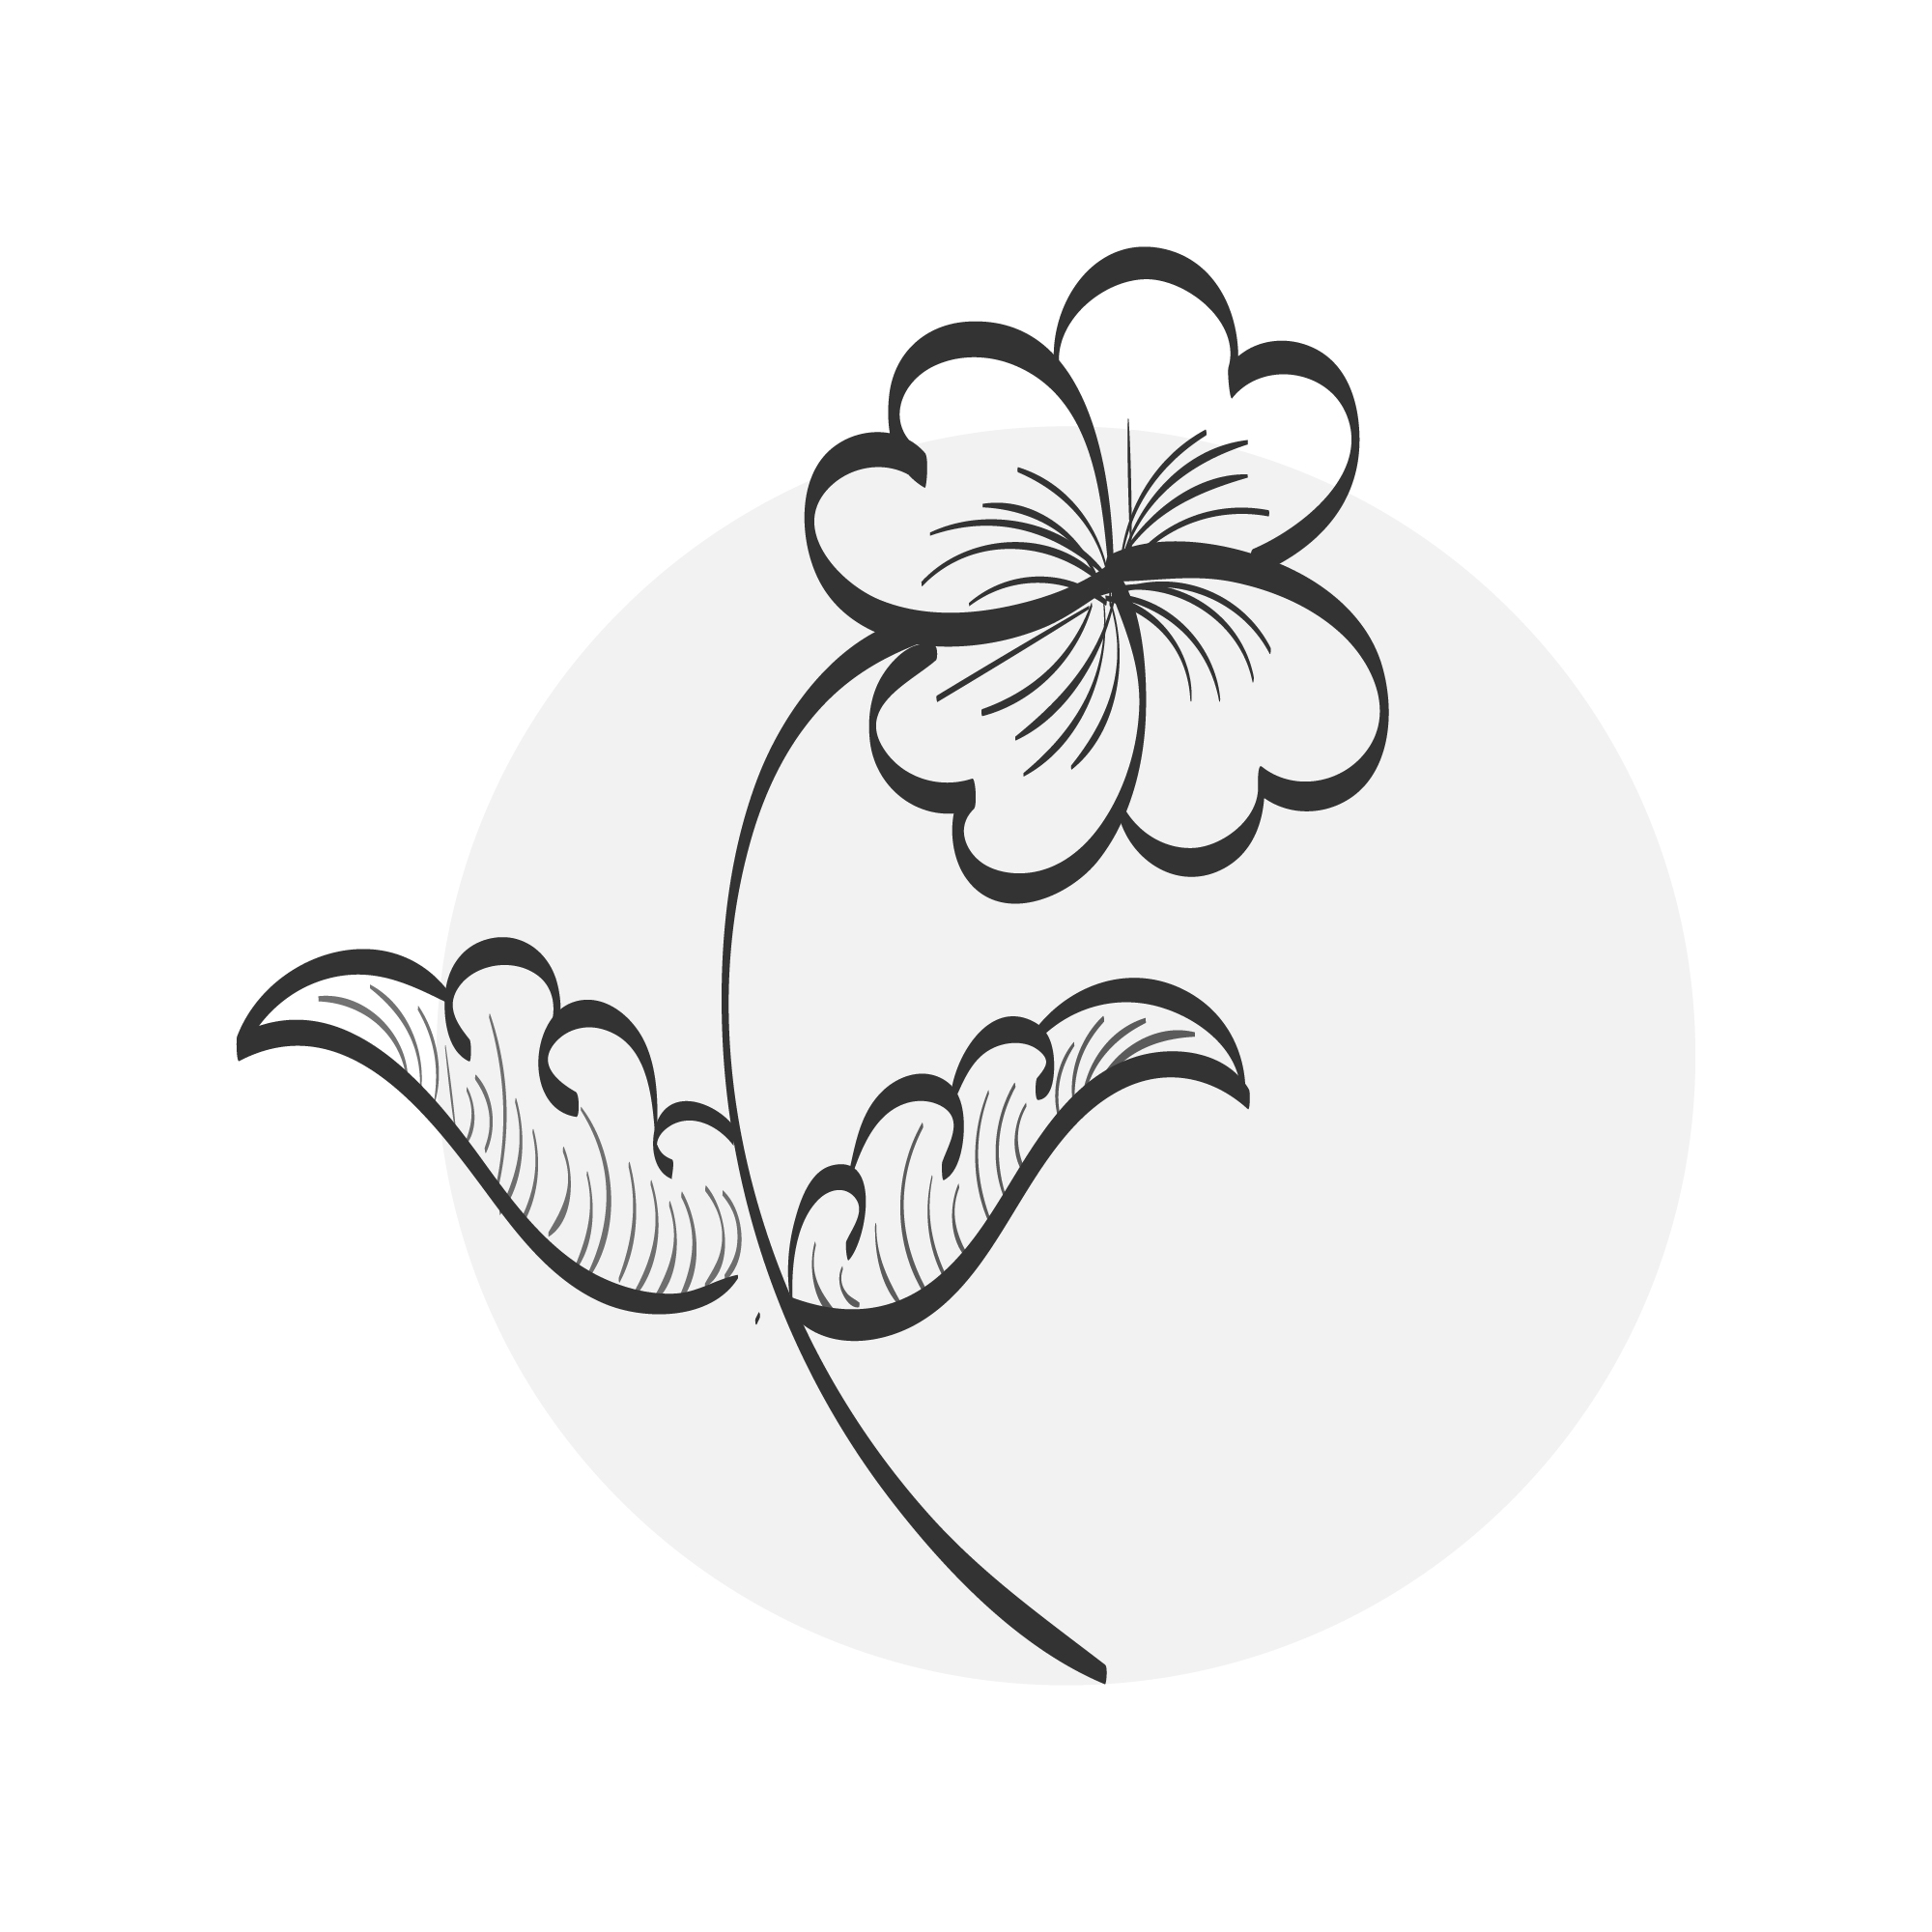 10 Flower Drawing With Line-Art for website.